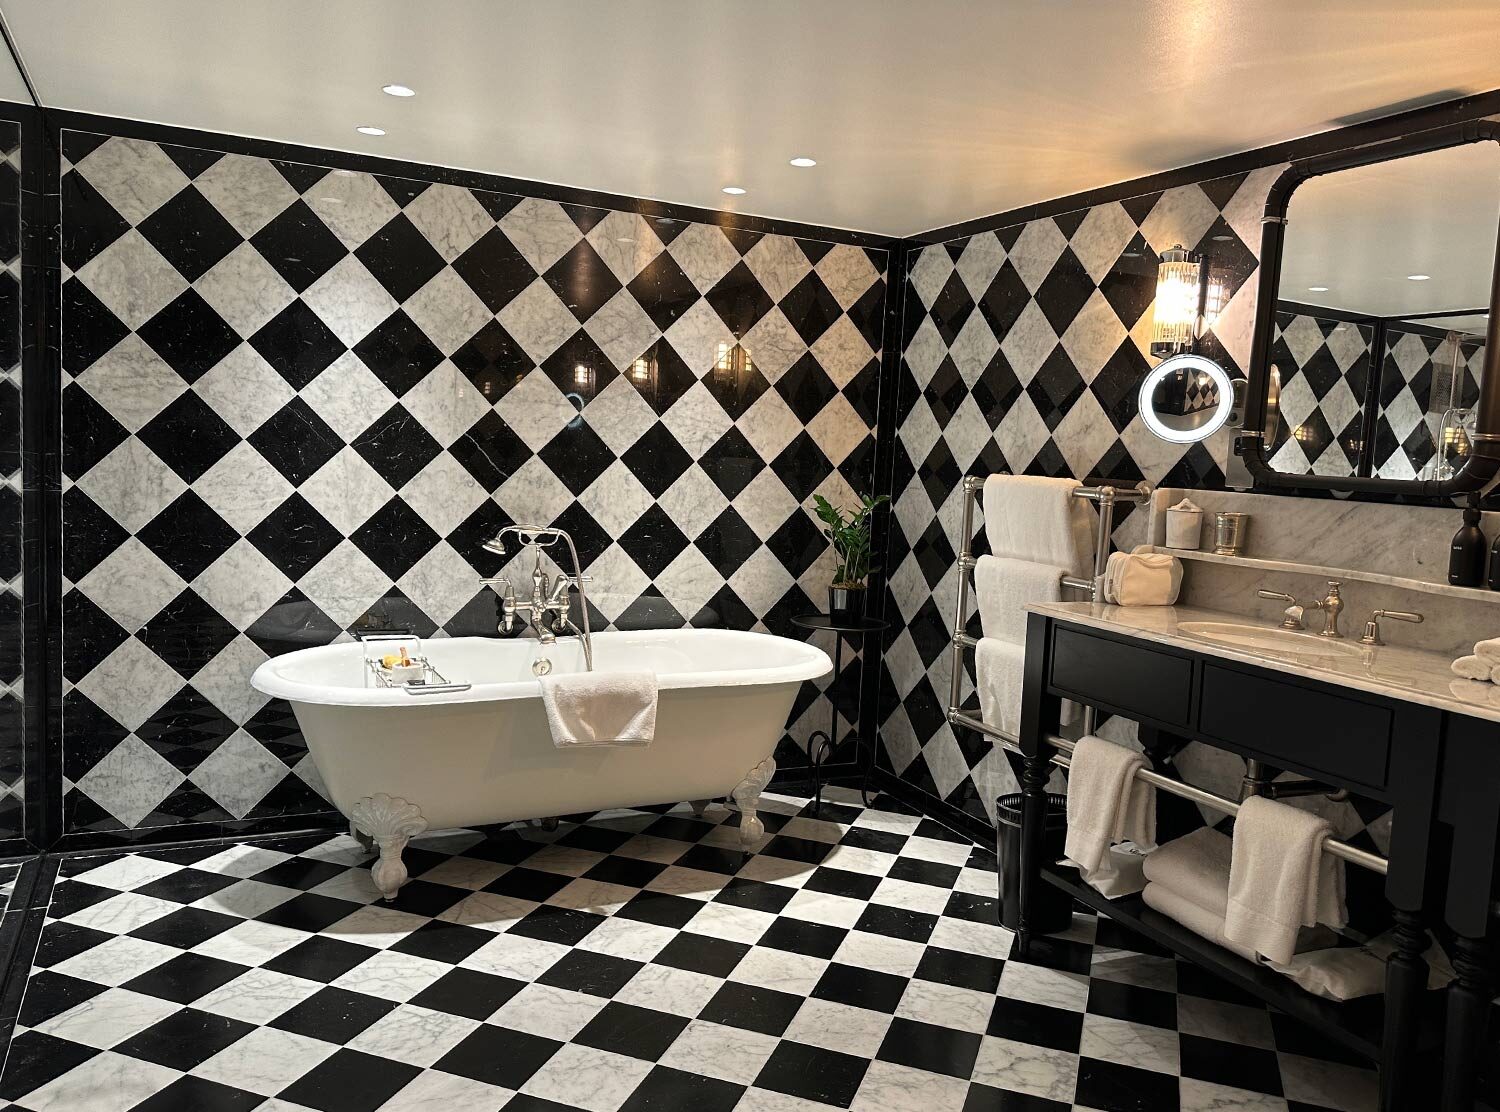 The Twenty Two Not all rooms come with a bathtub, but they are all made in this crowd-pleaser black and white marble